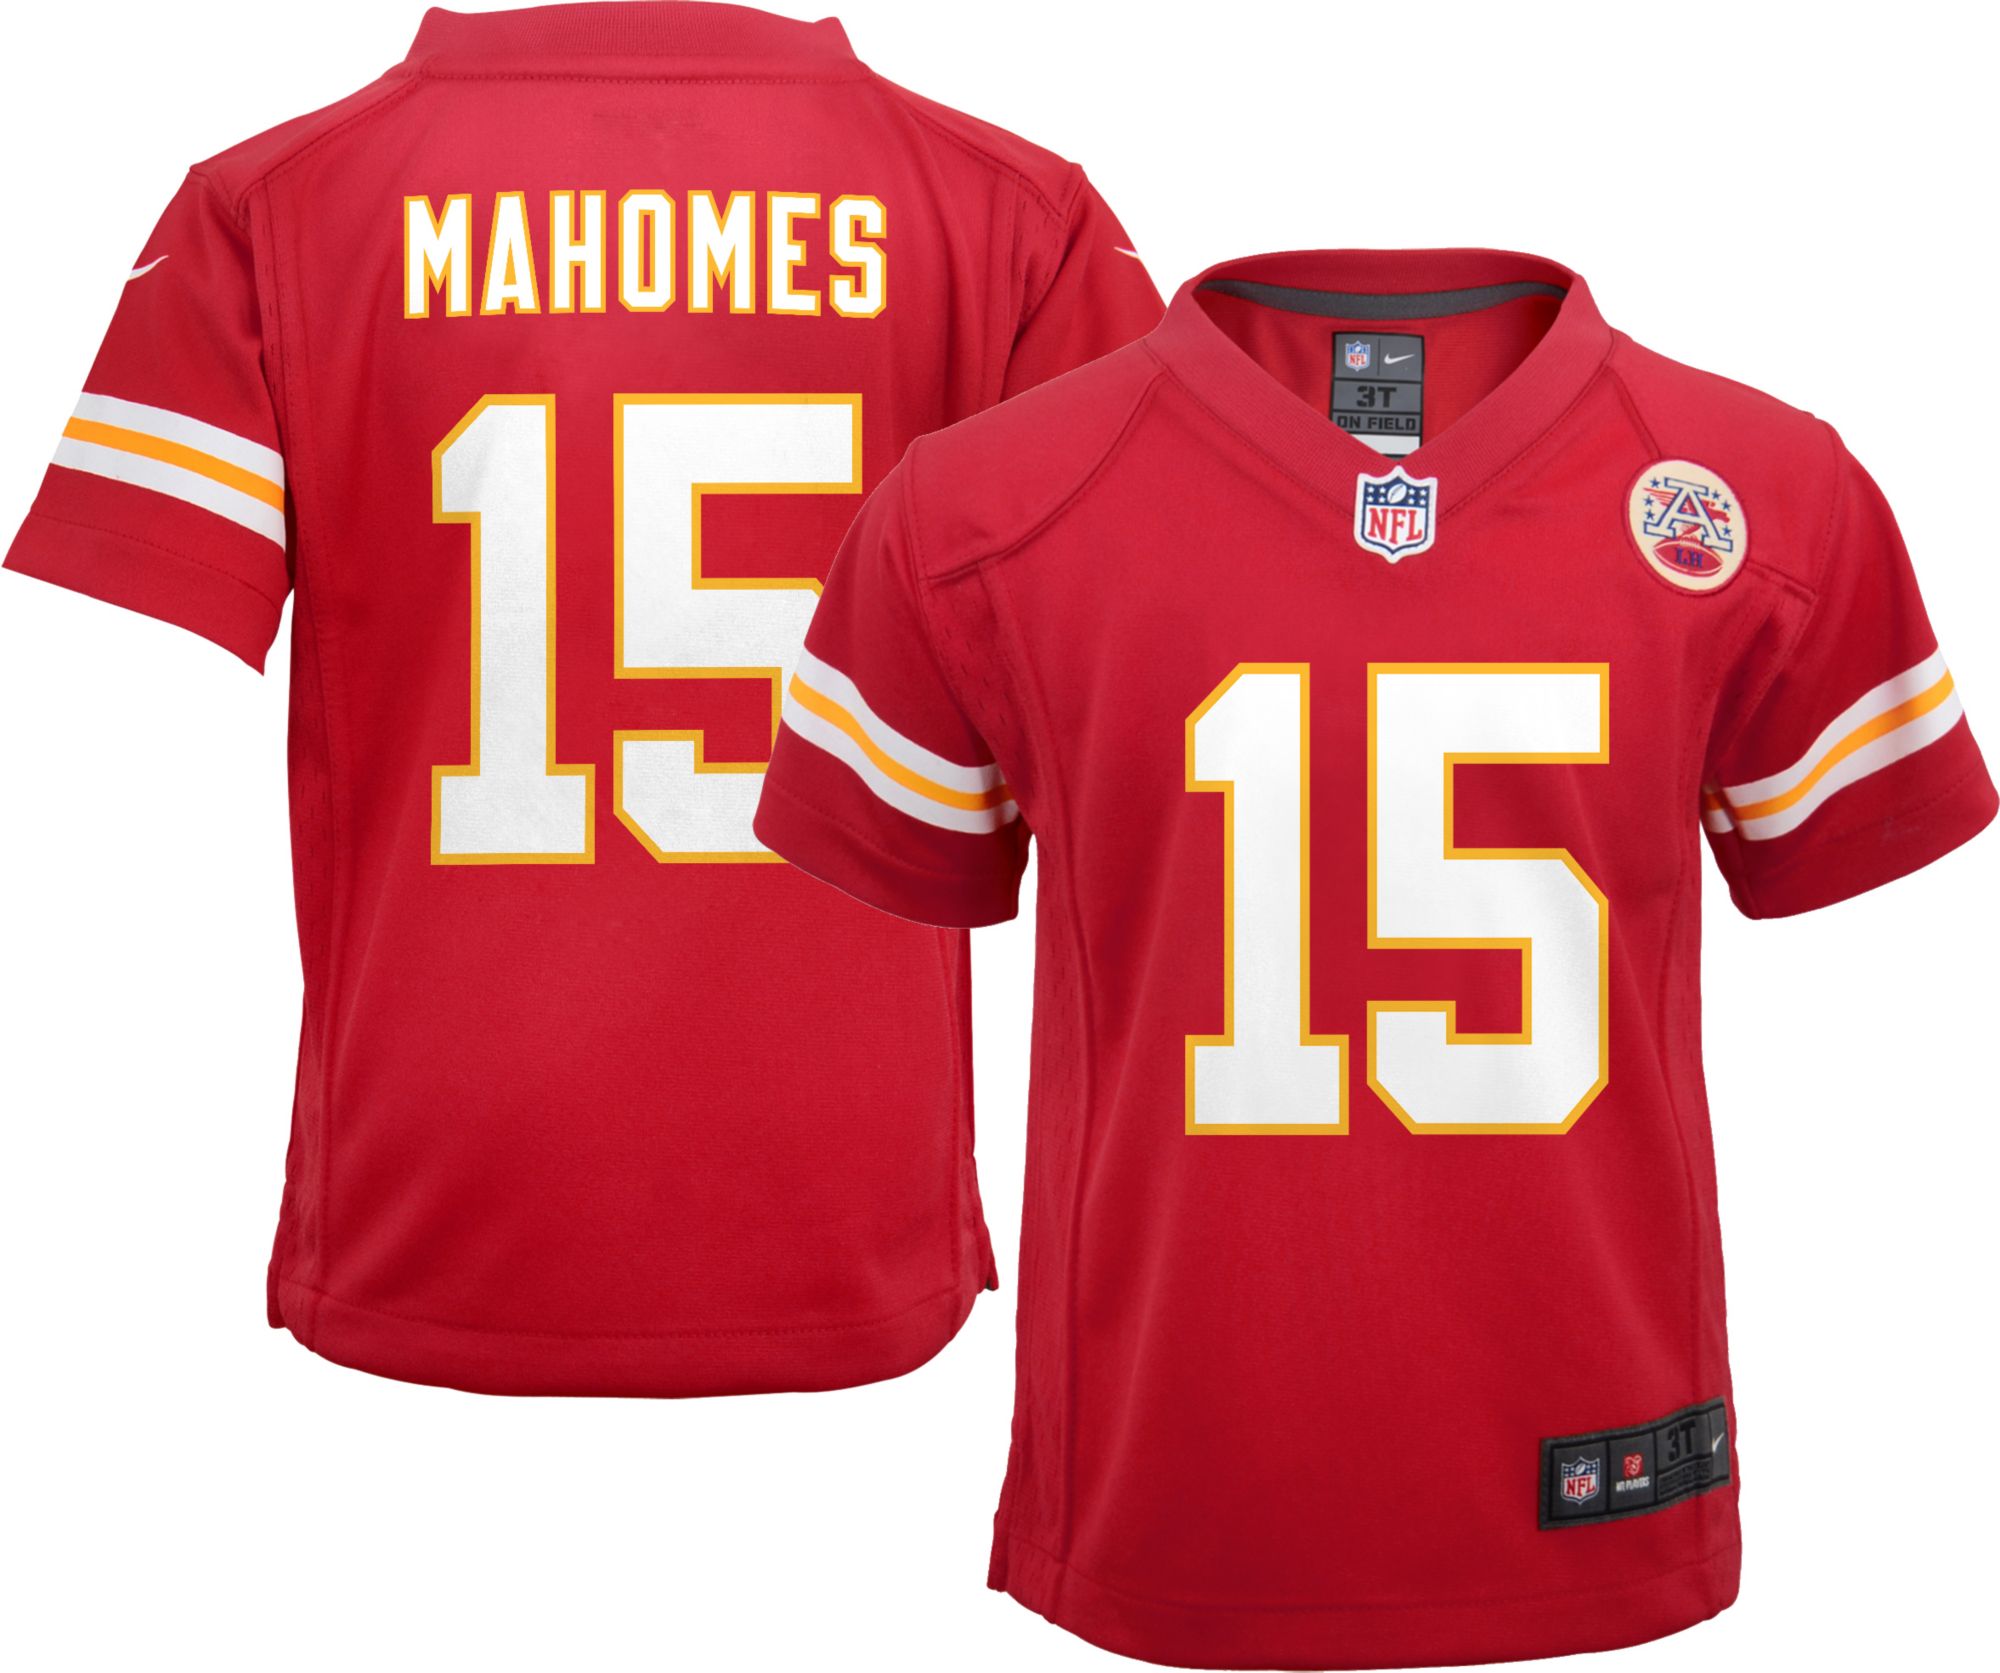 Nike NFL Kansas City Chiefs Patrick Mahomes 15 Nike Home Game Jersey Red -  University Red